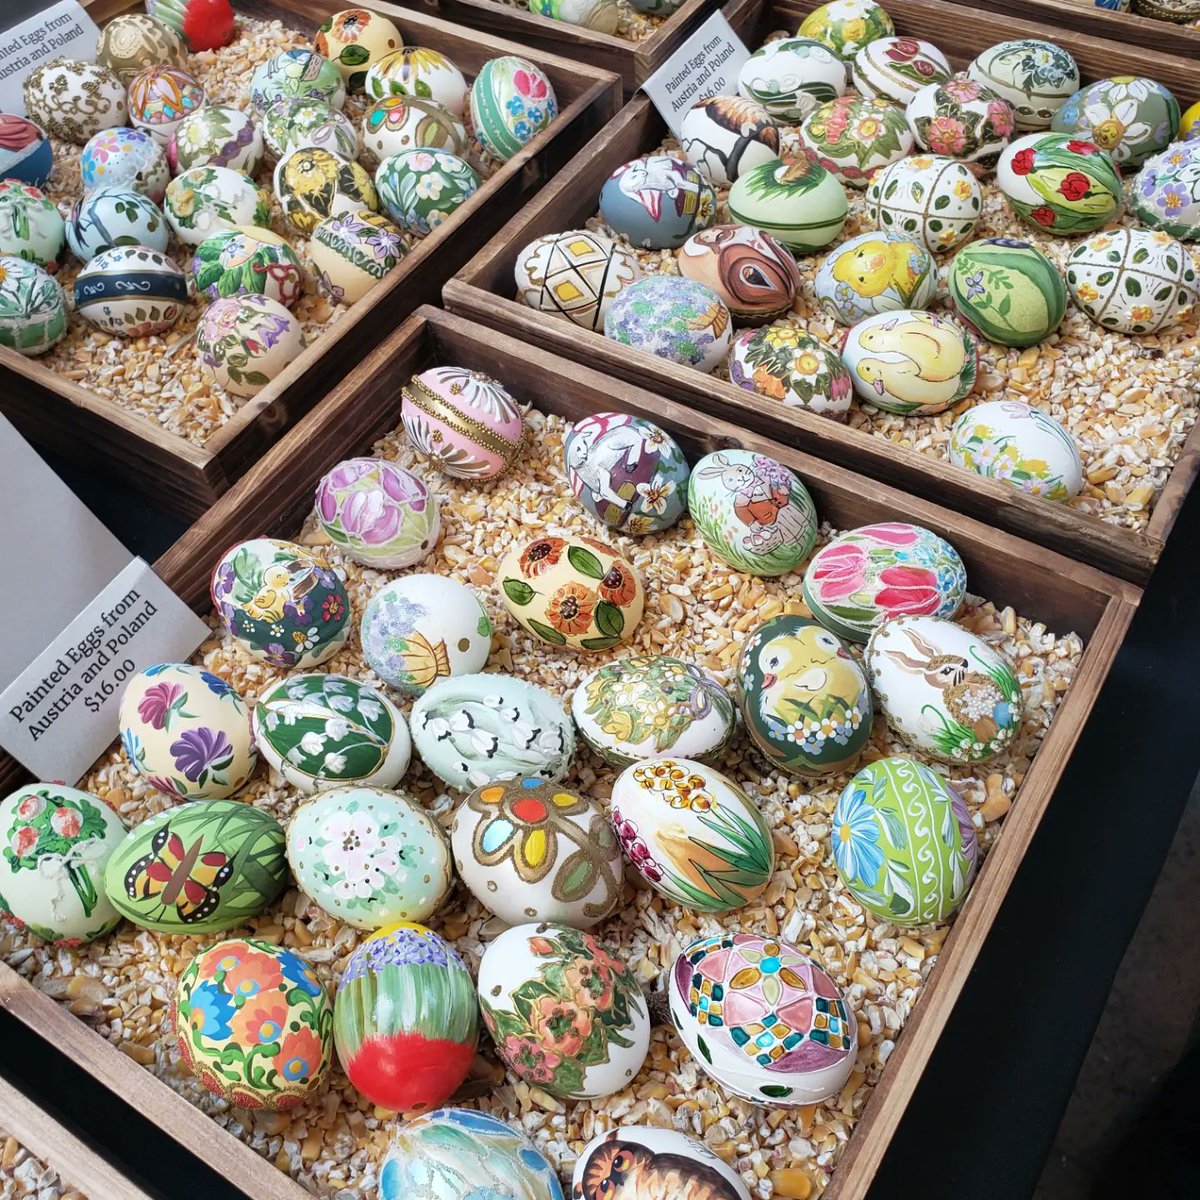 Happy Easter weekend Buffalo! Make a trip to the Broadway Market to celebrate the season 🧈🐑🥚💐